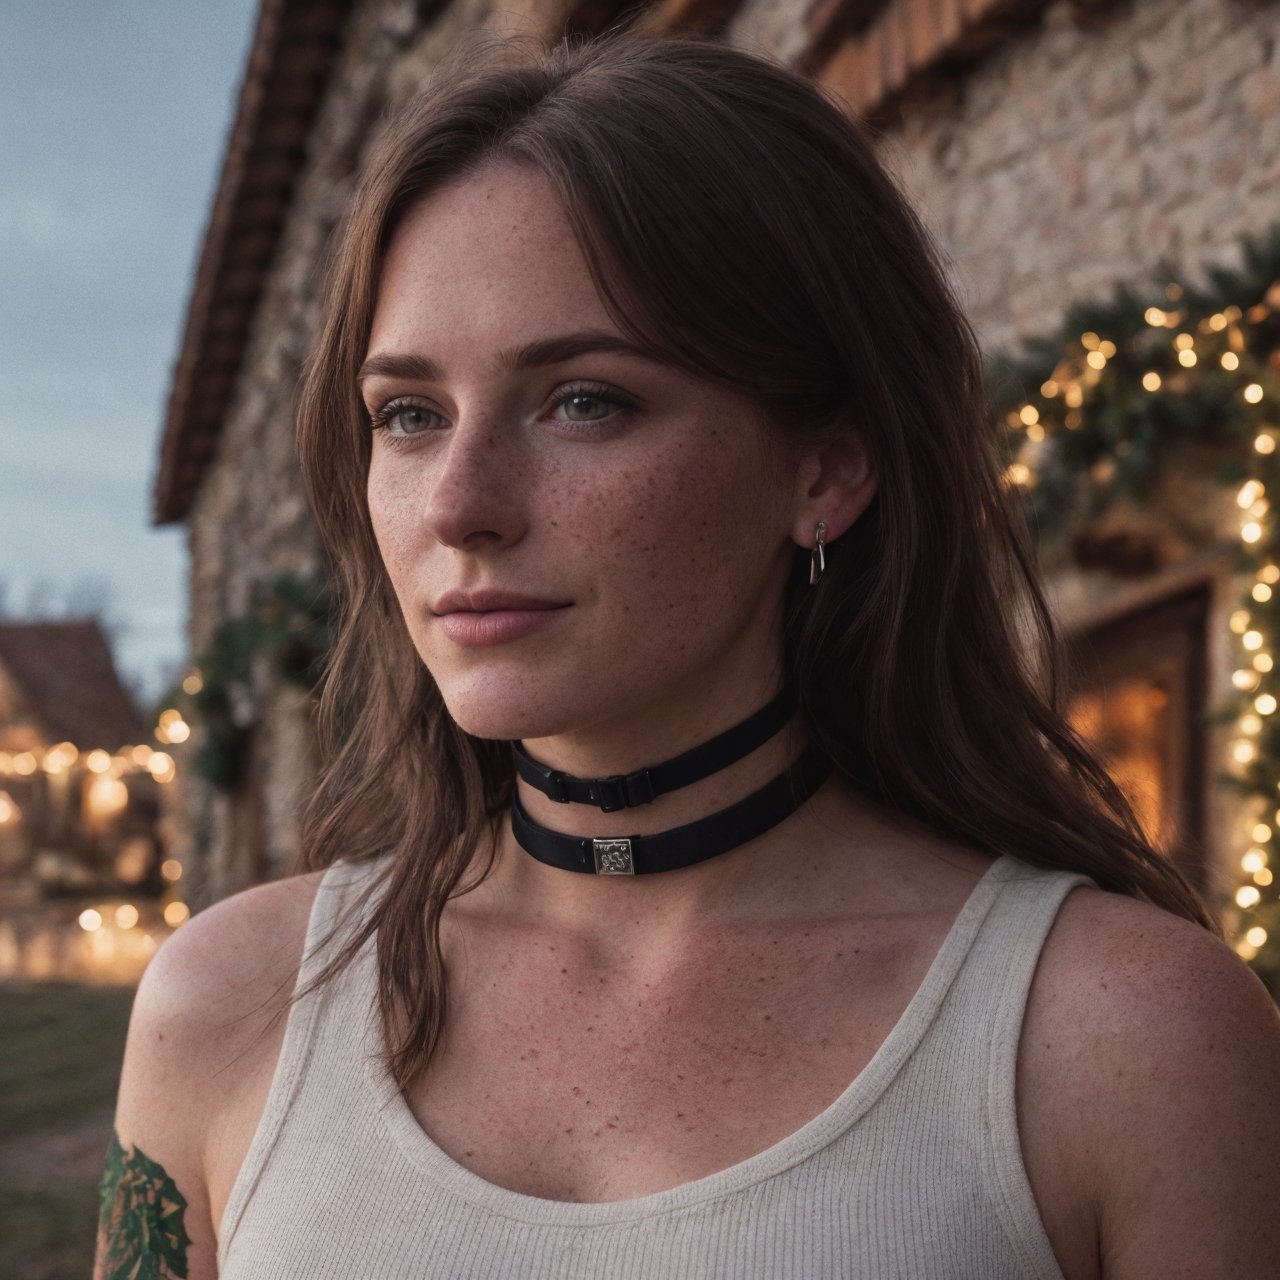 make the background look like a small village in christmas, full-length picture, warm lighting, medium hair, detailed face, detailed nose, woman wearing tank top, freckles, collar or choker, smirk, tattoo, realism, realistic, raw, analog, woman, portrait, photorealistic, analog ,realism